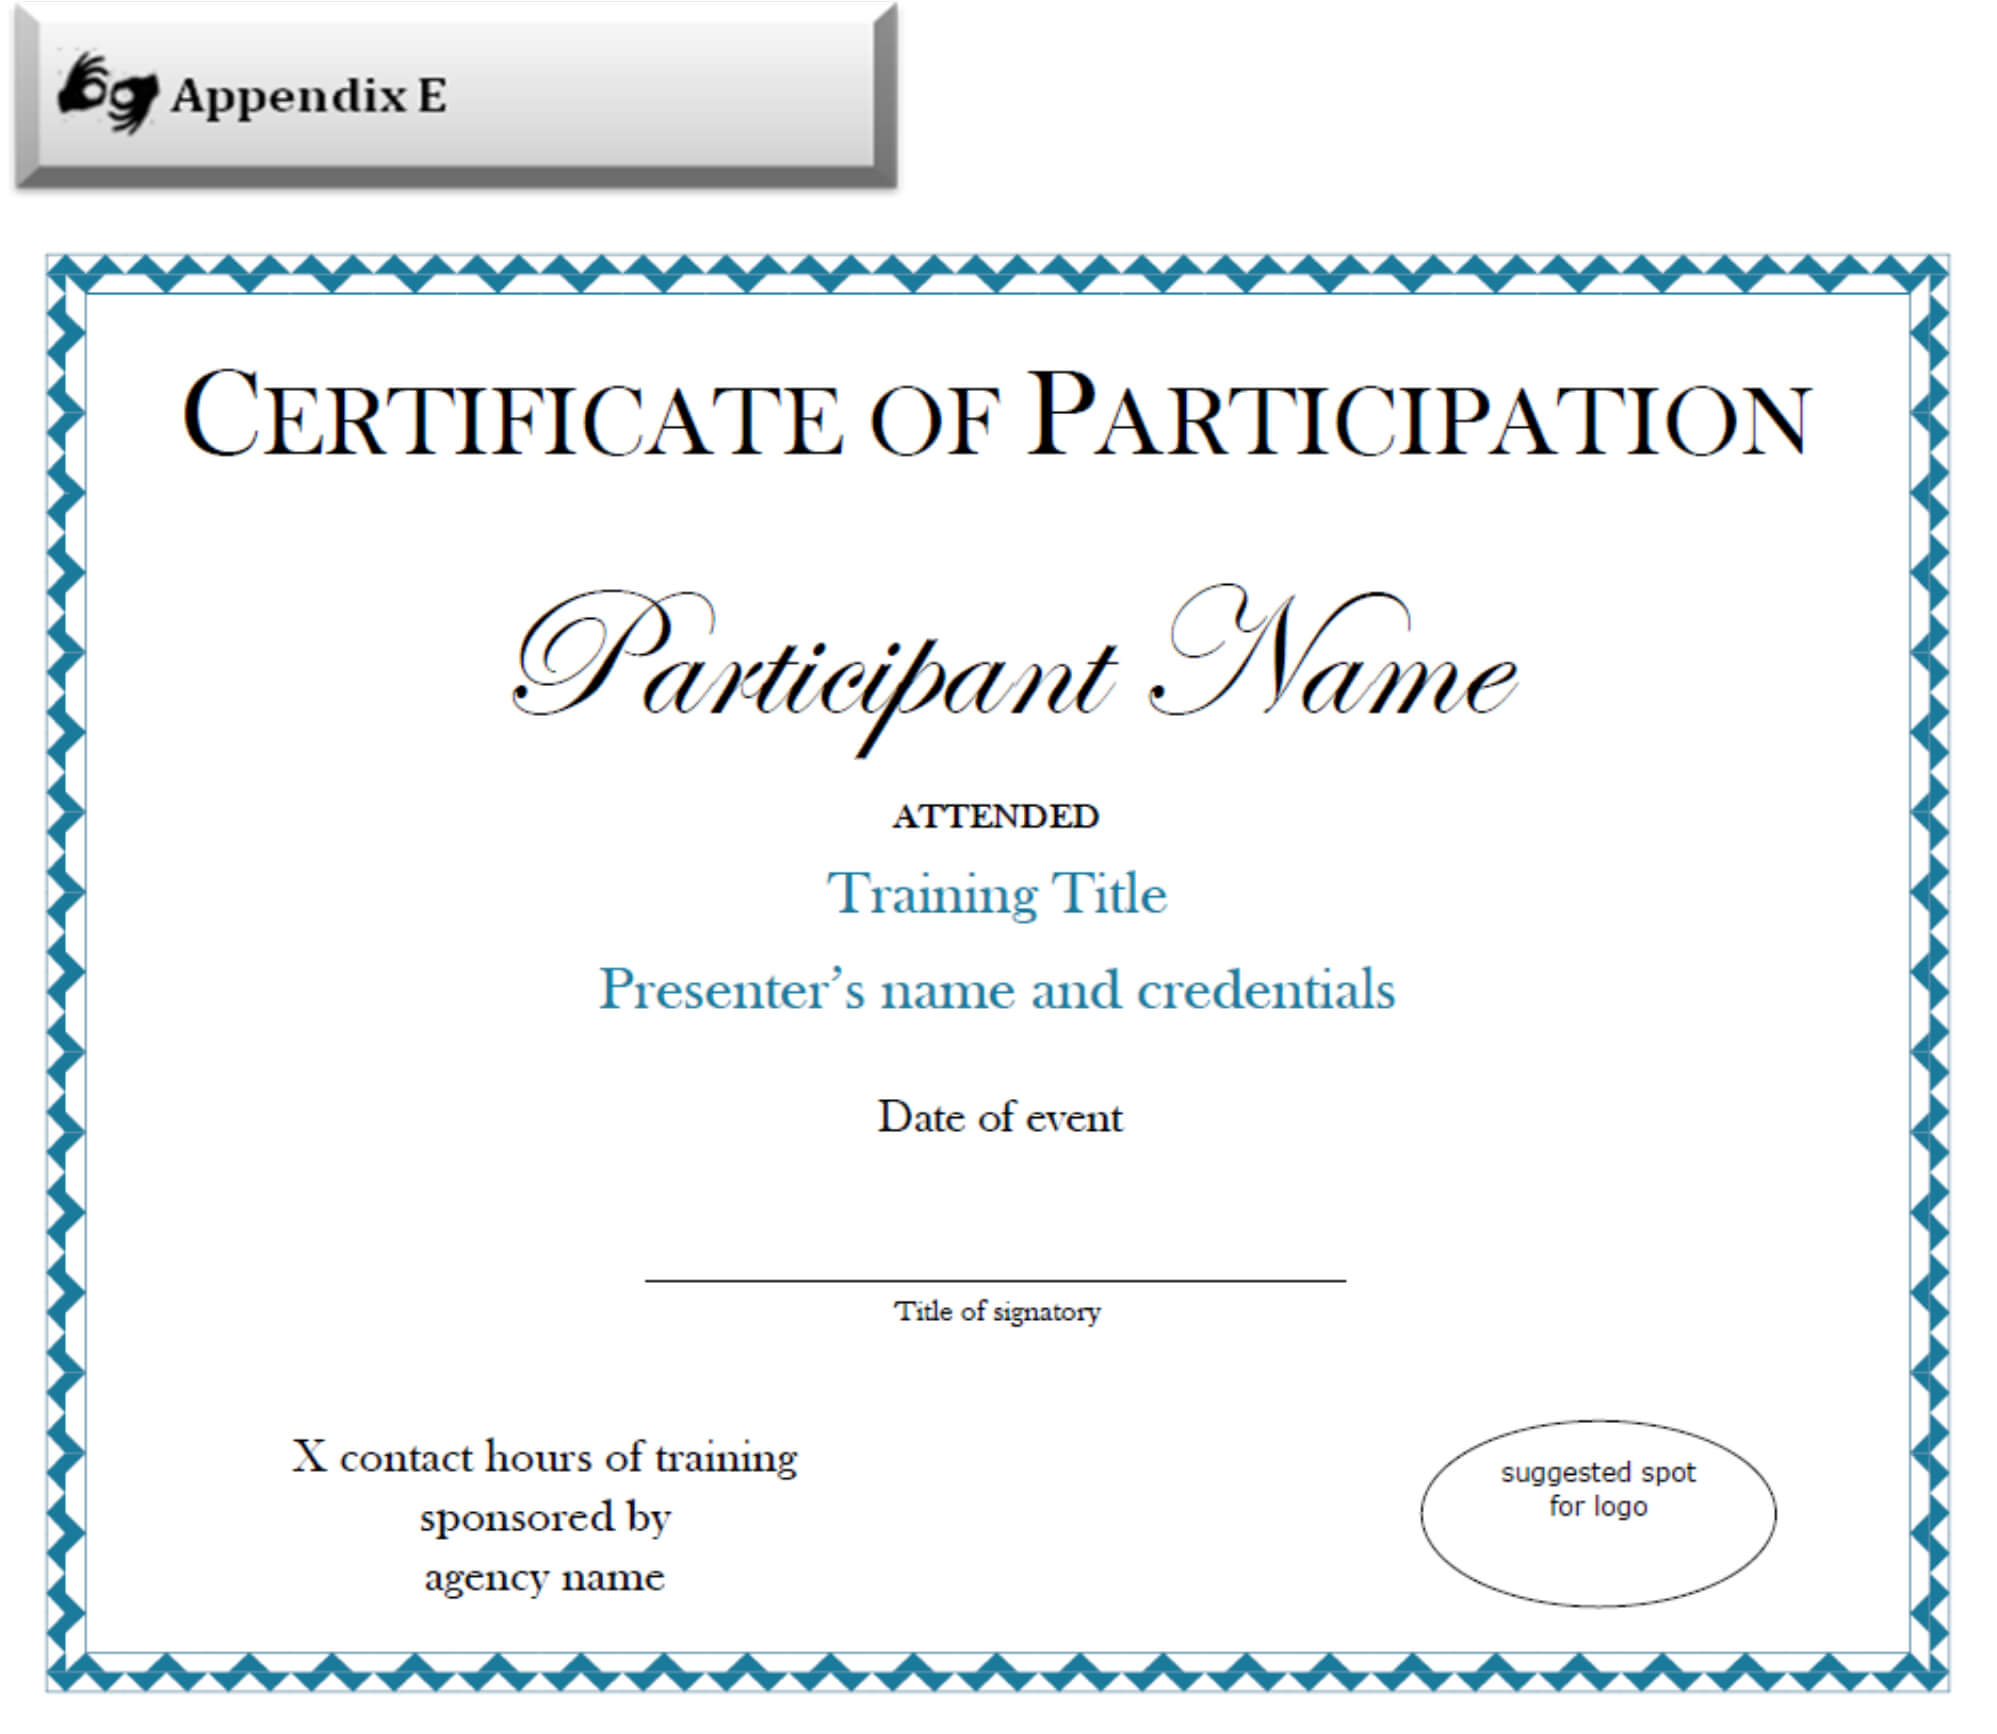 Certificate Of Participation Sample Free Download Inside Certificate Of Participation Template Pdf